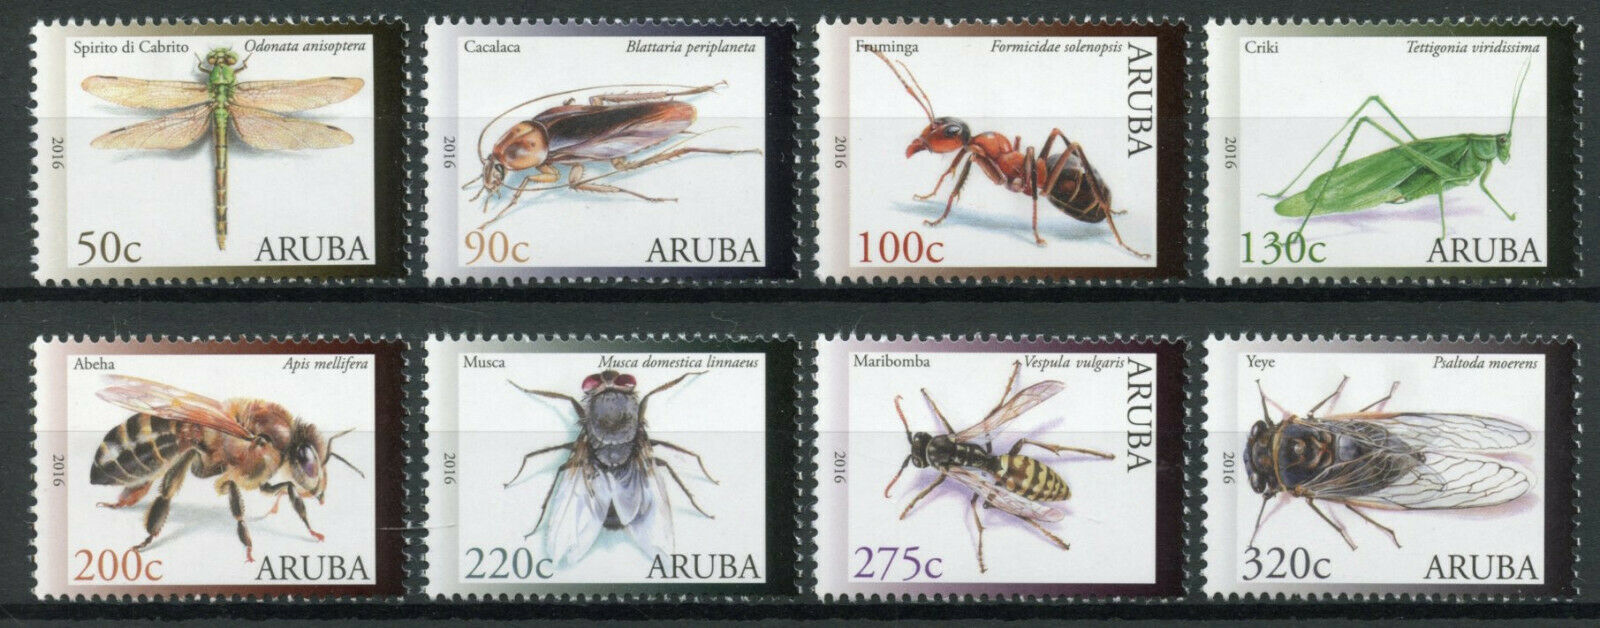 Aruba Insects Stamps 2016 MNH Crickets Ants Bees Flies Dragonflies 8v Set